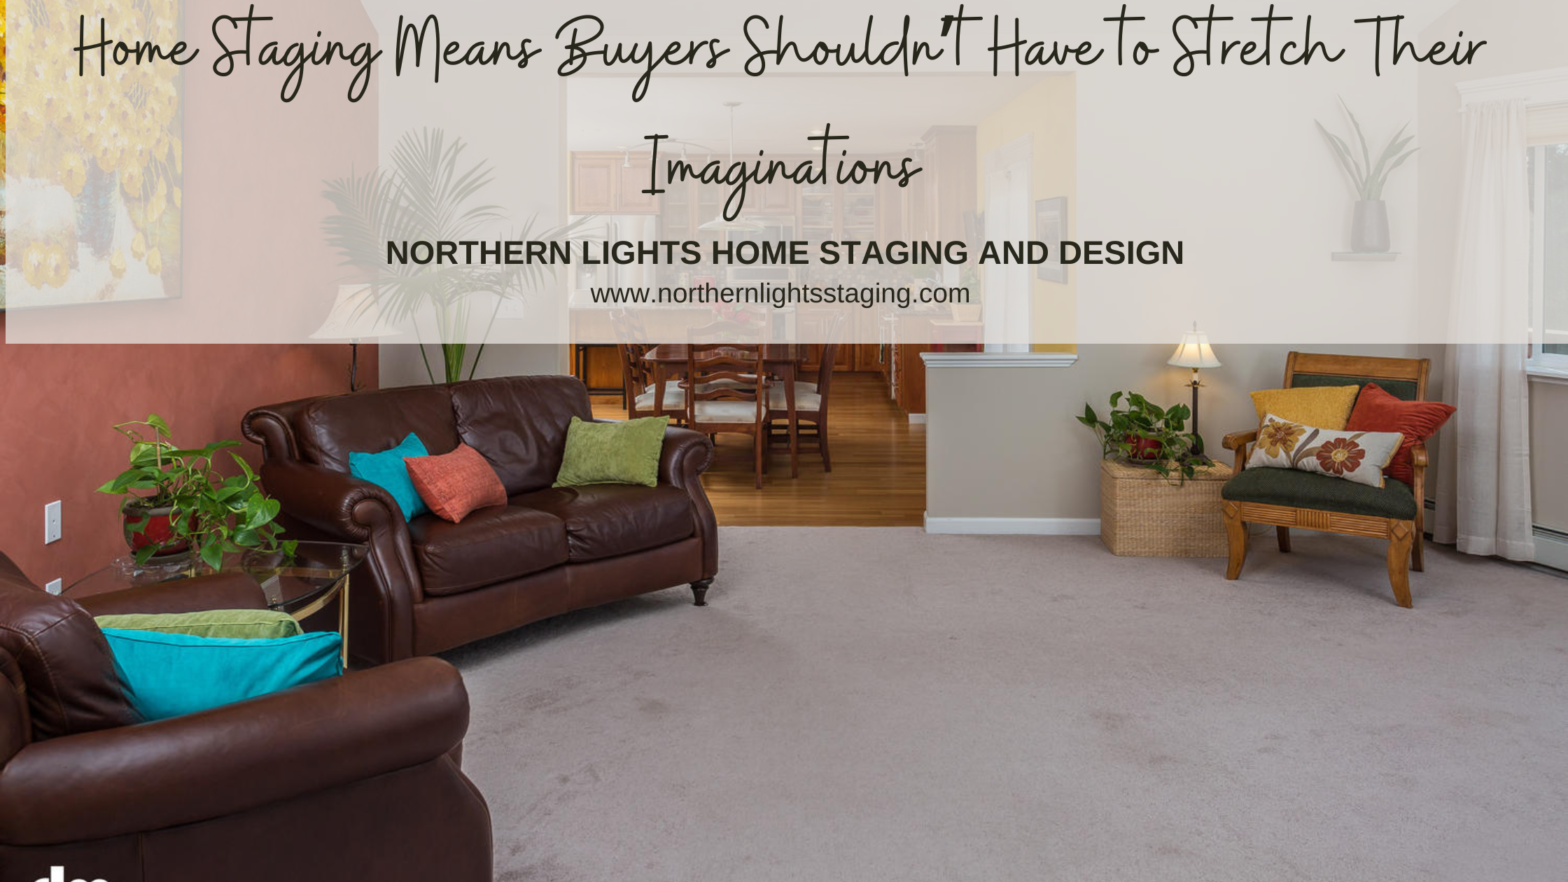 Home Staging Means Buyers Shouldn’t Have to Stretch Their Imaginations